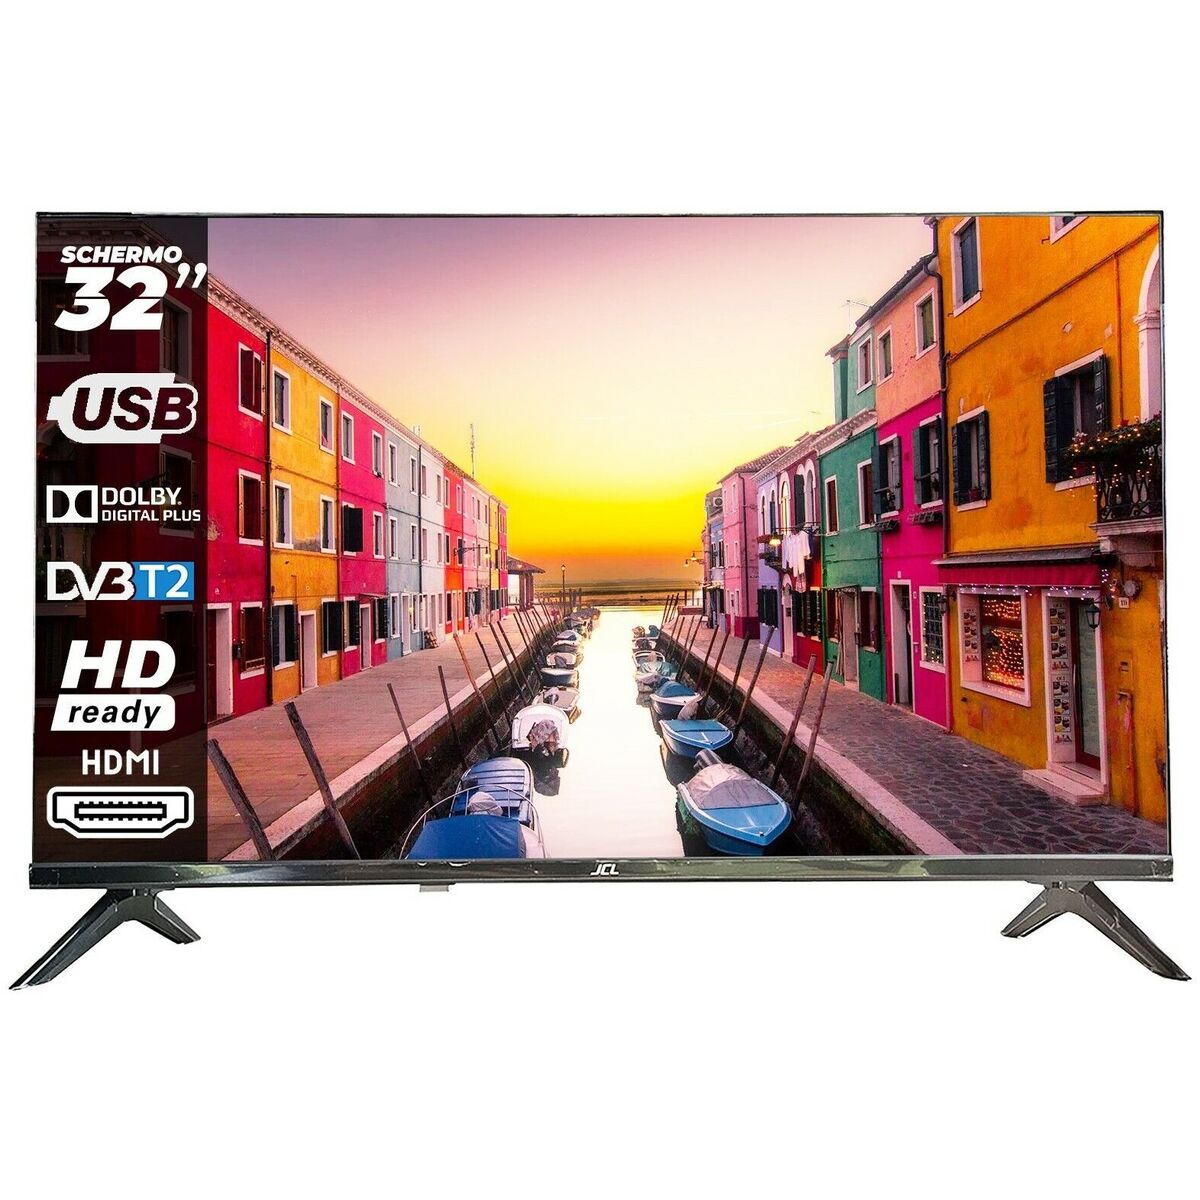 Smart TV JCL 32HDDTV2023 HD 32" LED, JCL, Electronics, TV, Video and home cinema, smart-tv-jcl-32hddtv2023-hd-32-led, Brand_JCL, category-reference-2609, category-reference-2625, category-reference-2931, category-reference-t-18805, category-reference-t-18827, category-reference-t-19653, cinema and television, Condition_NEW, entertainment, Price_100 - 200, RiotNook